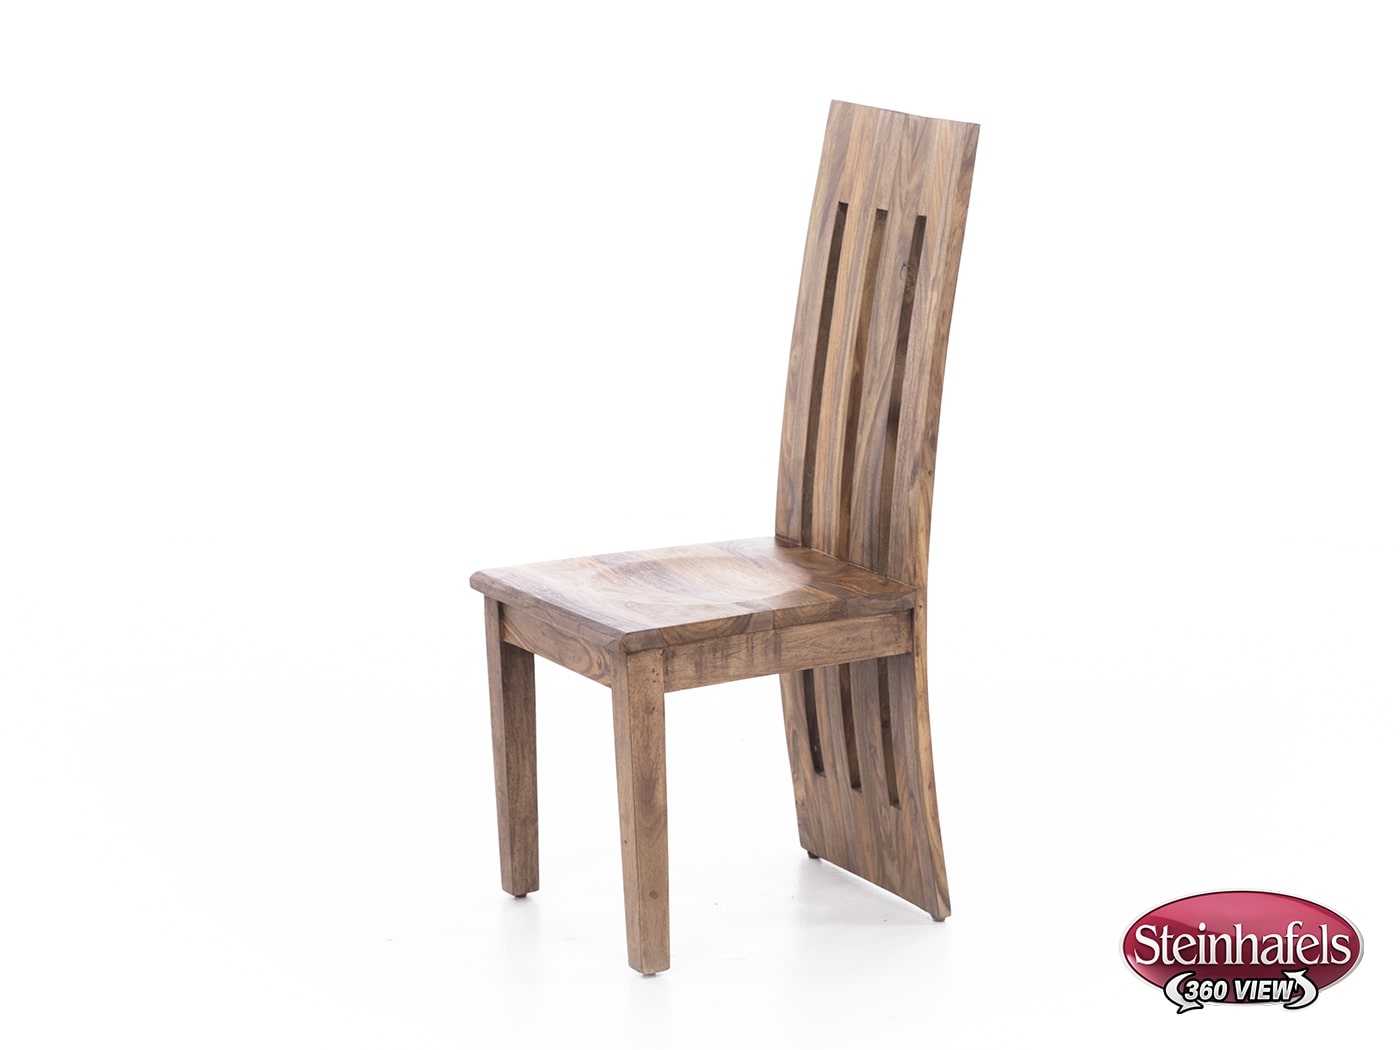 ctoc brown inch standard seat height side chair  image   